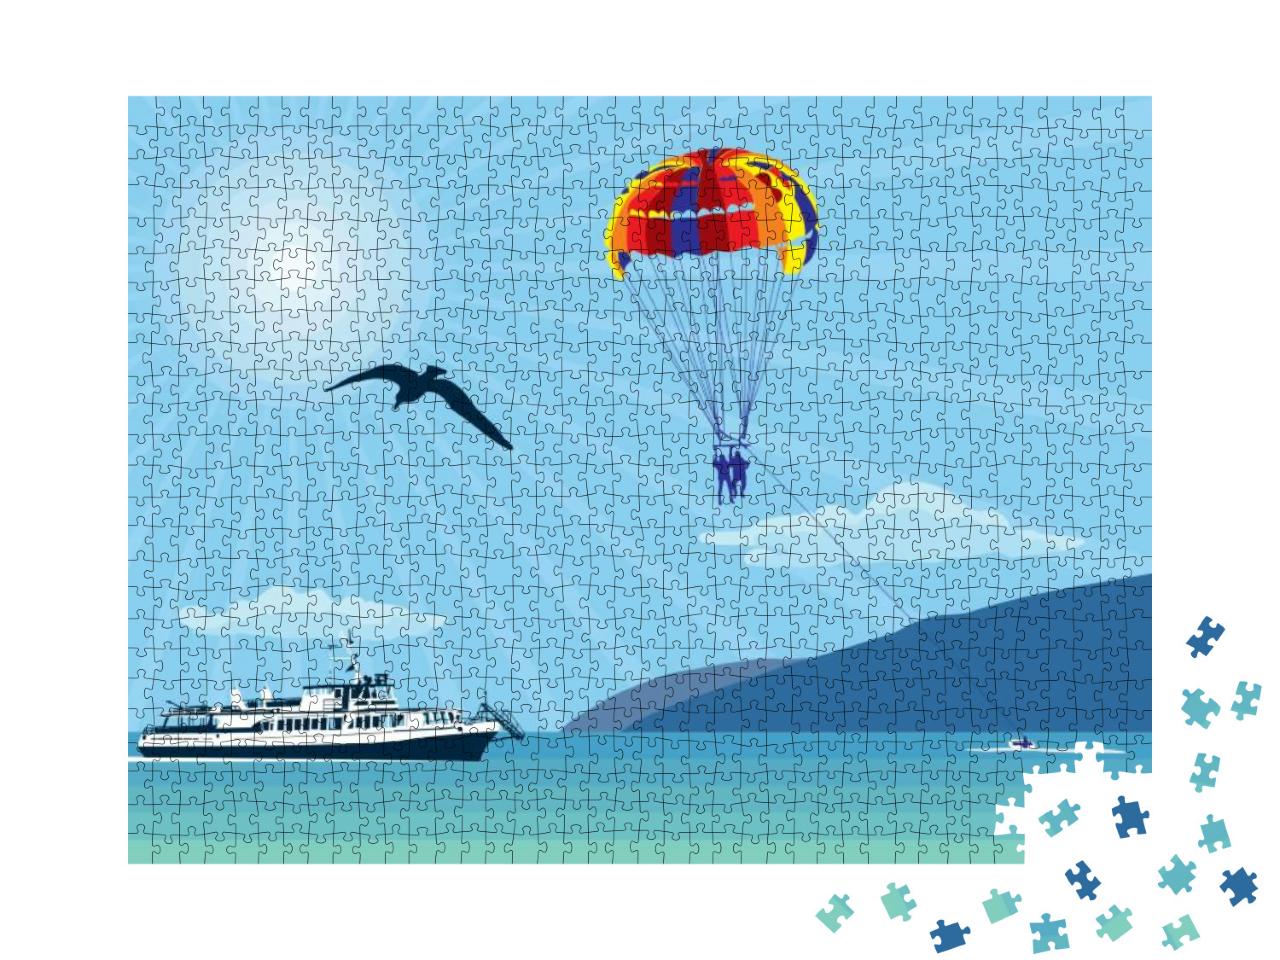 Parachute Over the Sea. Outdoor Activities Over the Sea &... Jigsaw Puzzle with 1000 pieces